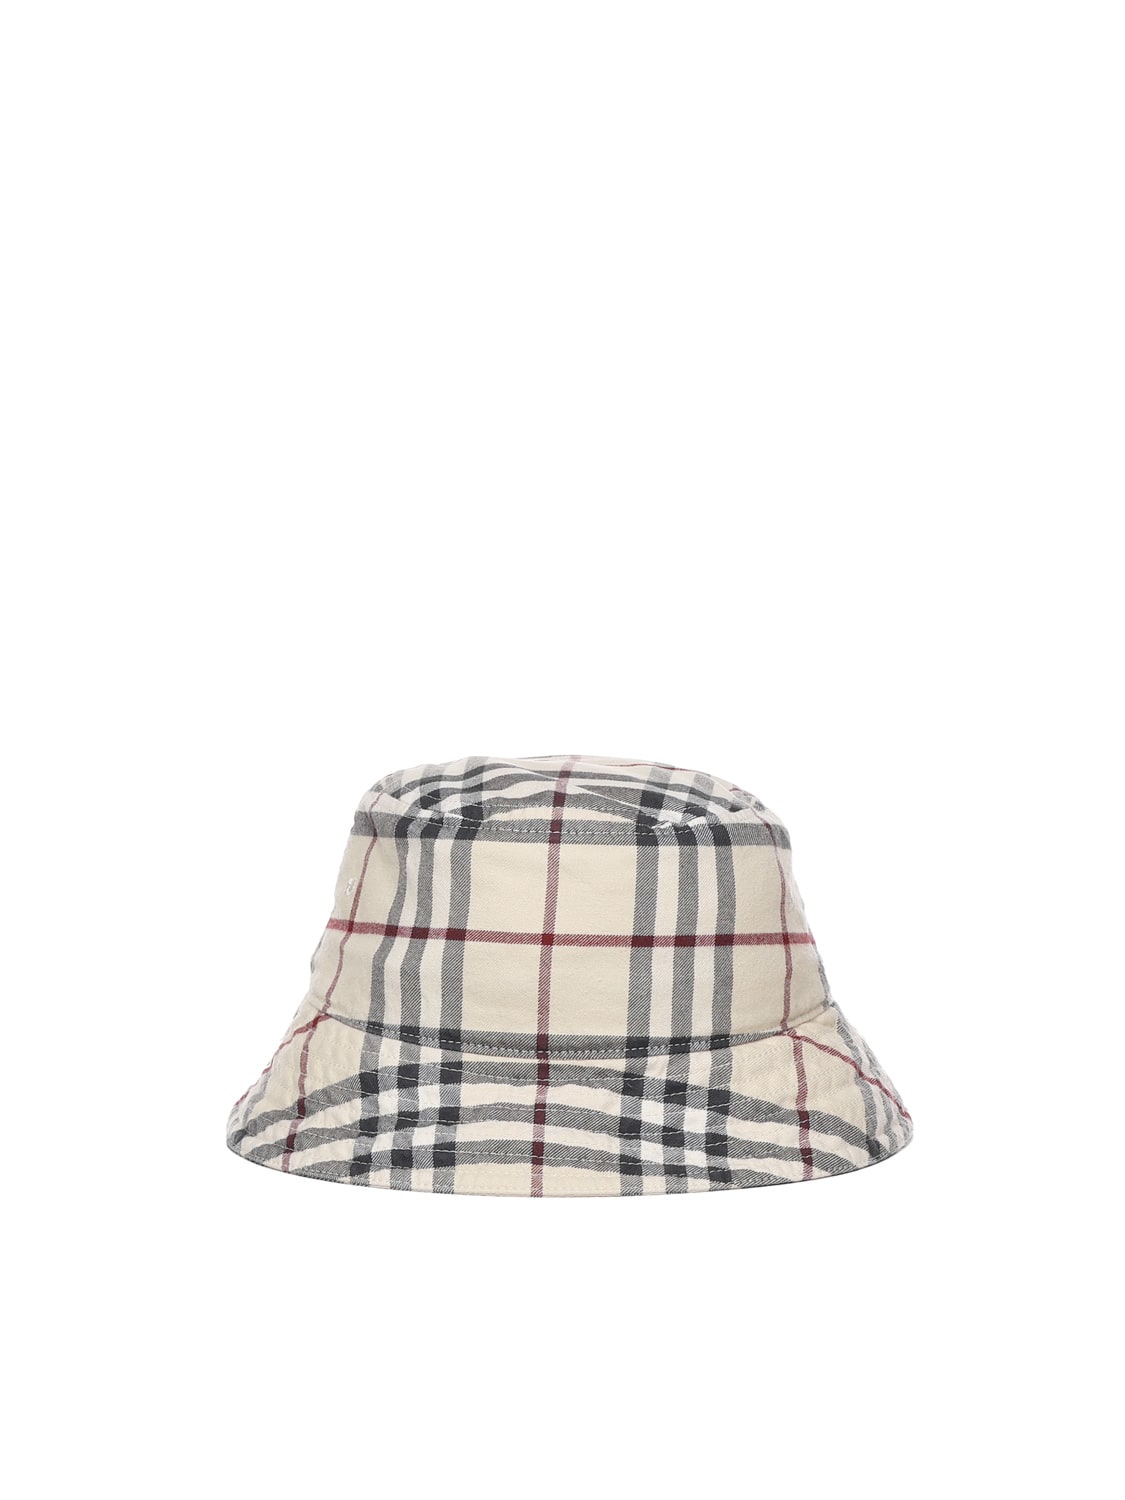 Burberry Vintage Check Bucket Hat In White